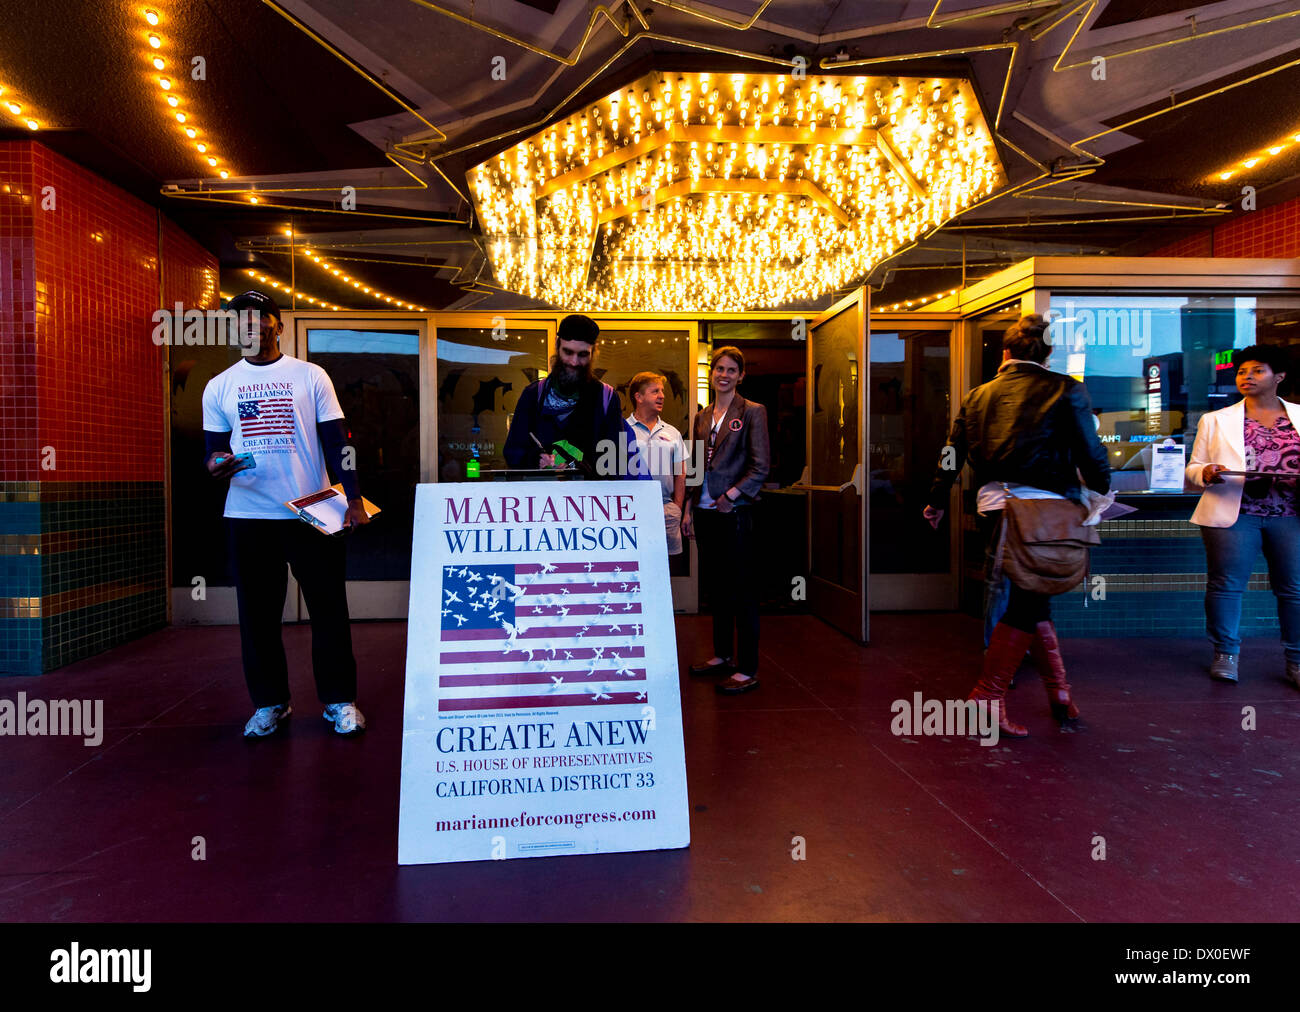 Los Angeles, California, USA. 15th Mar, 2014. Marianne Williamson for Congress volunteers wait outside the Crest Theatre for the start of a campaign talk by the best-selling author, who is running to replace retiring Congressman Henry Waxman in California District 33. Credit:  Brian Cahn/ZUMAPRESS.com/Alamy Live News Stock Photo